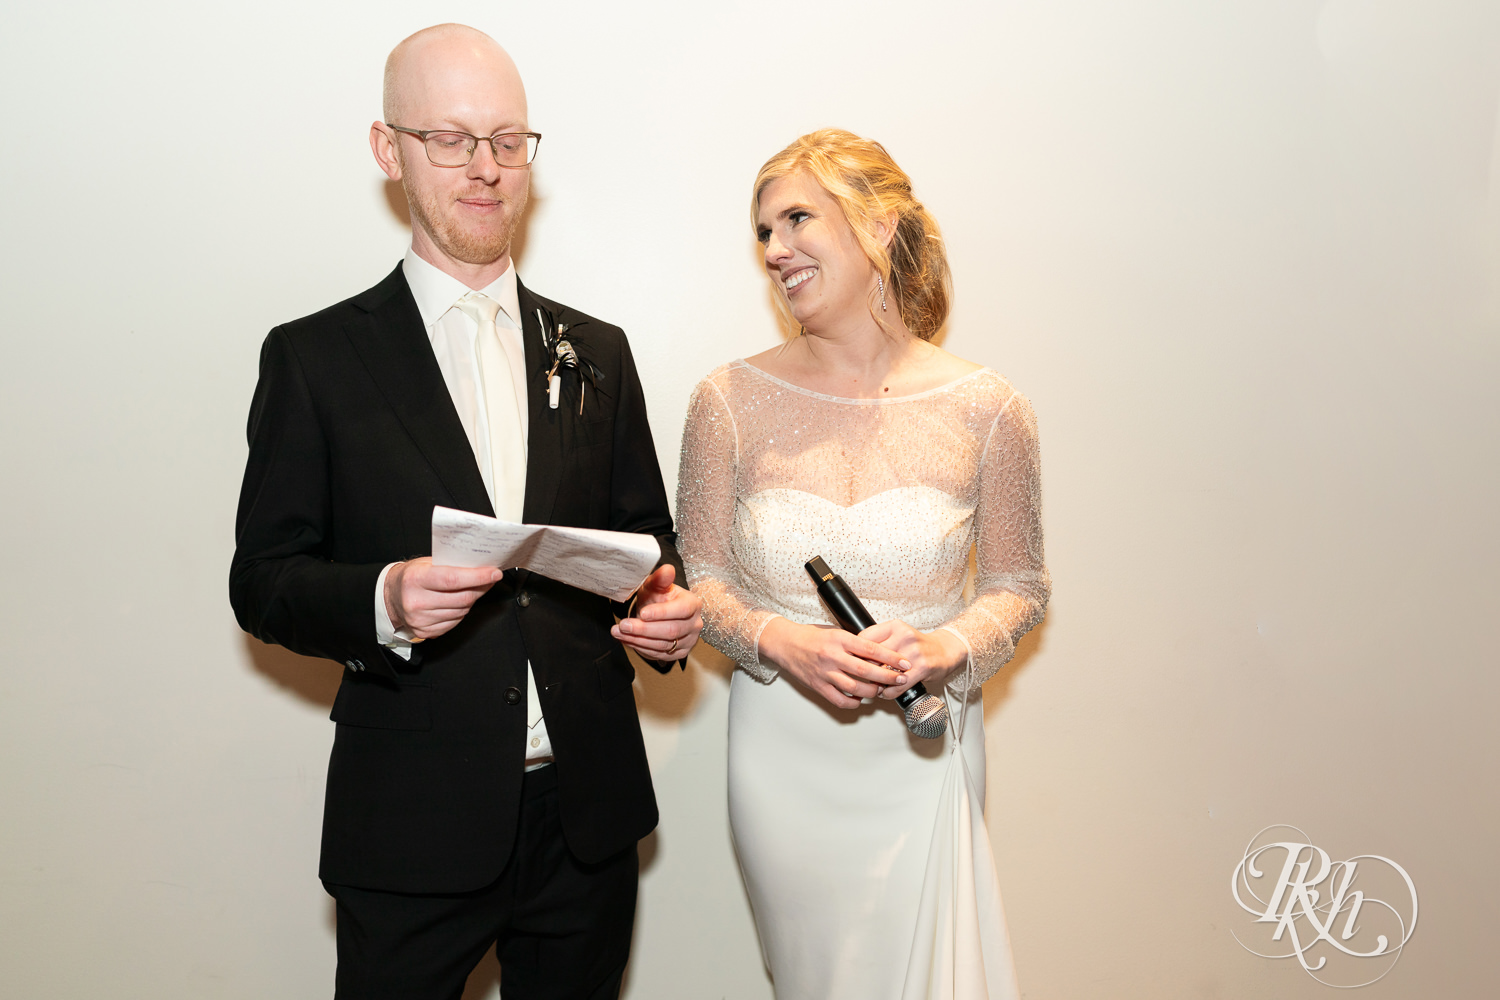 Bride and groom smile during wedding reception at Gatherings at Station 10 in Saint Paul, Minnesota.